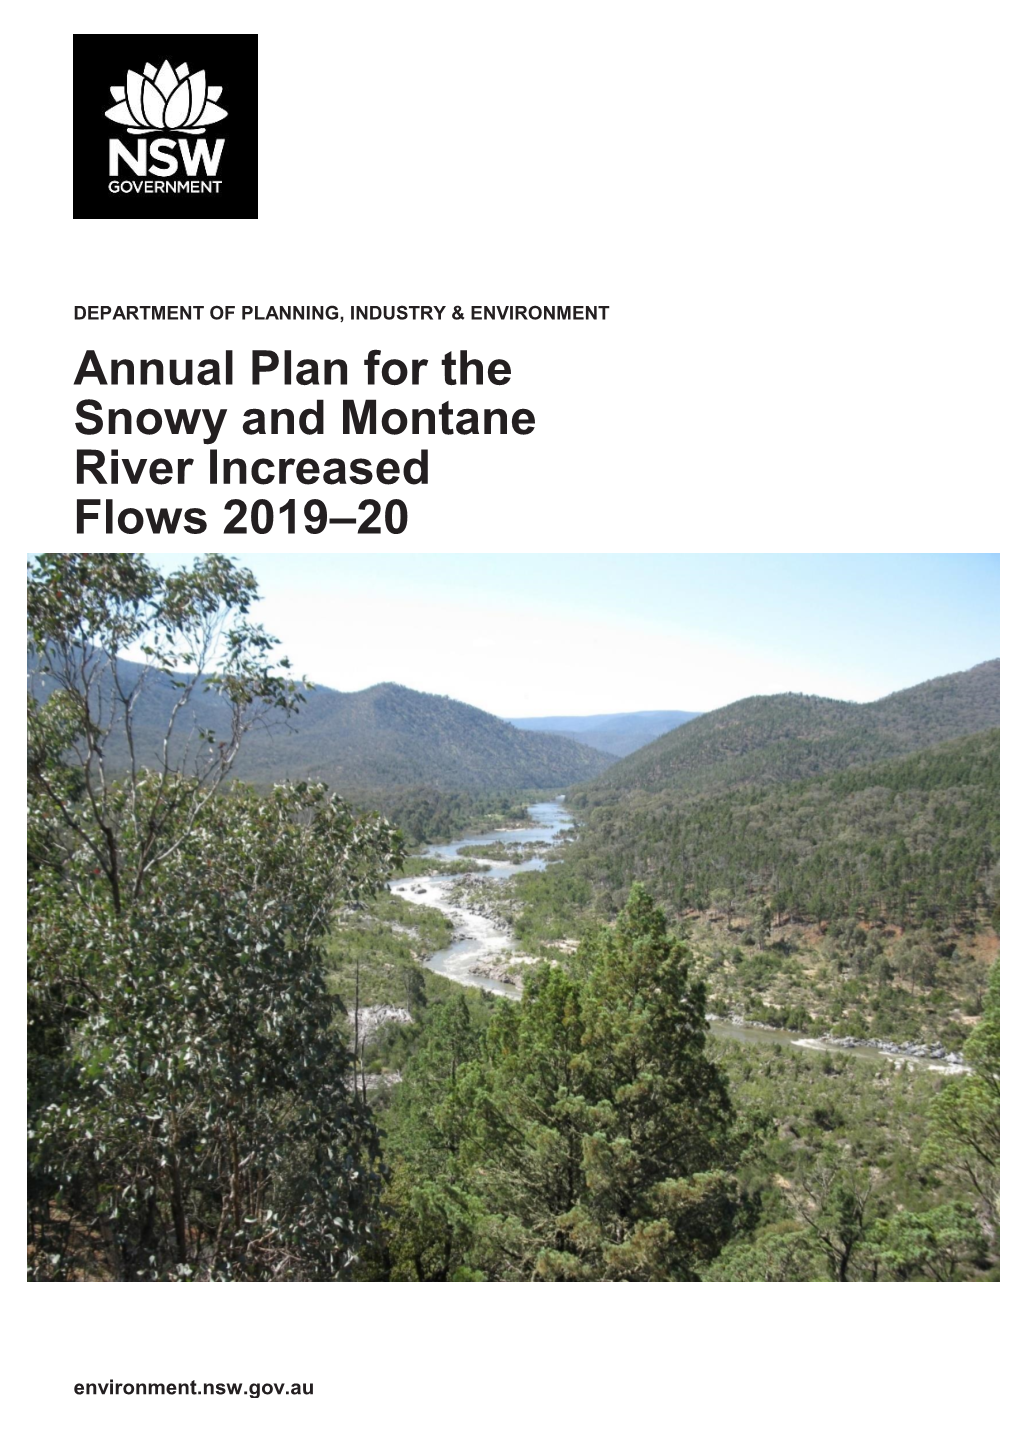 Annual Plan for the Snowy and Montane River Increased Flows 2019–20